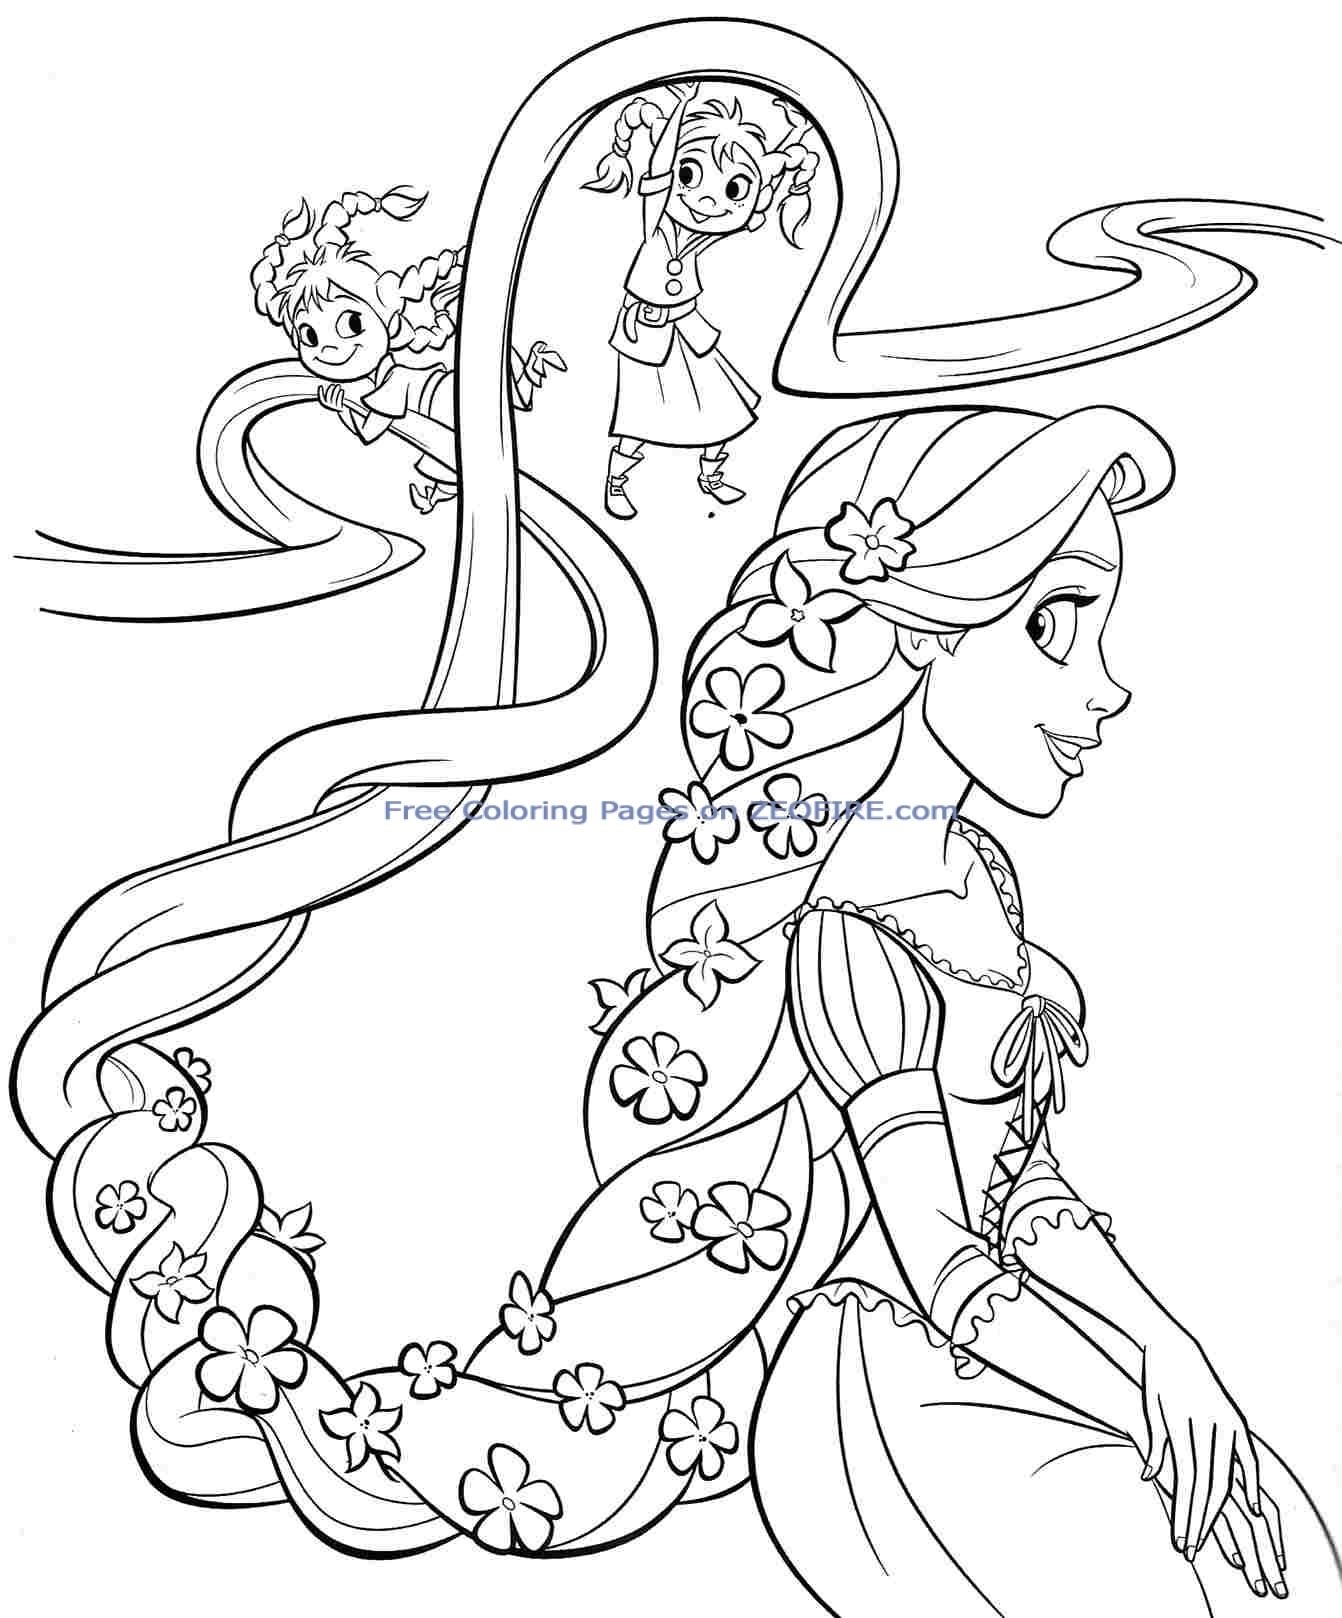 Sofia The First Coloring Pages To Print at GetDrawings | Free download